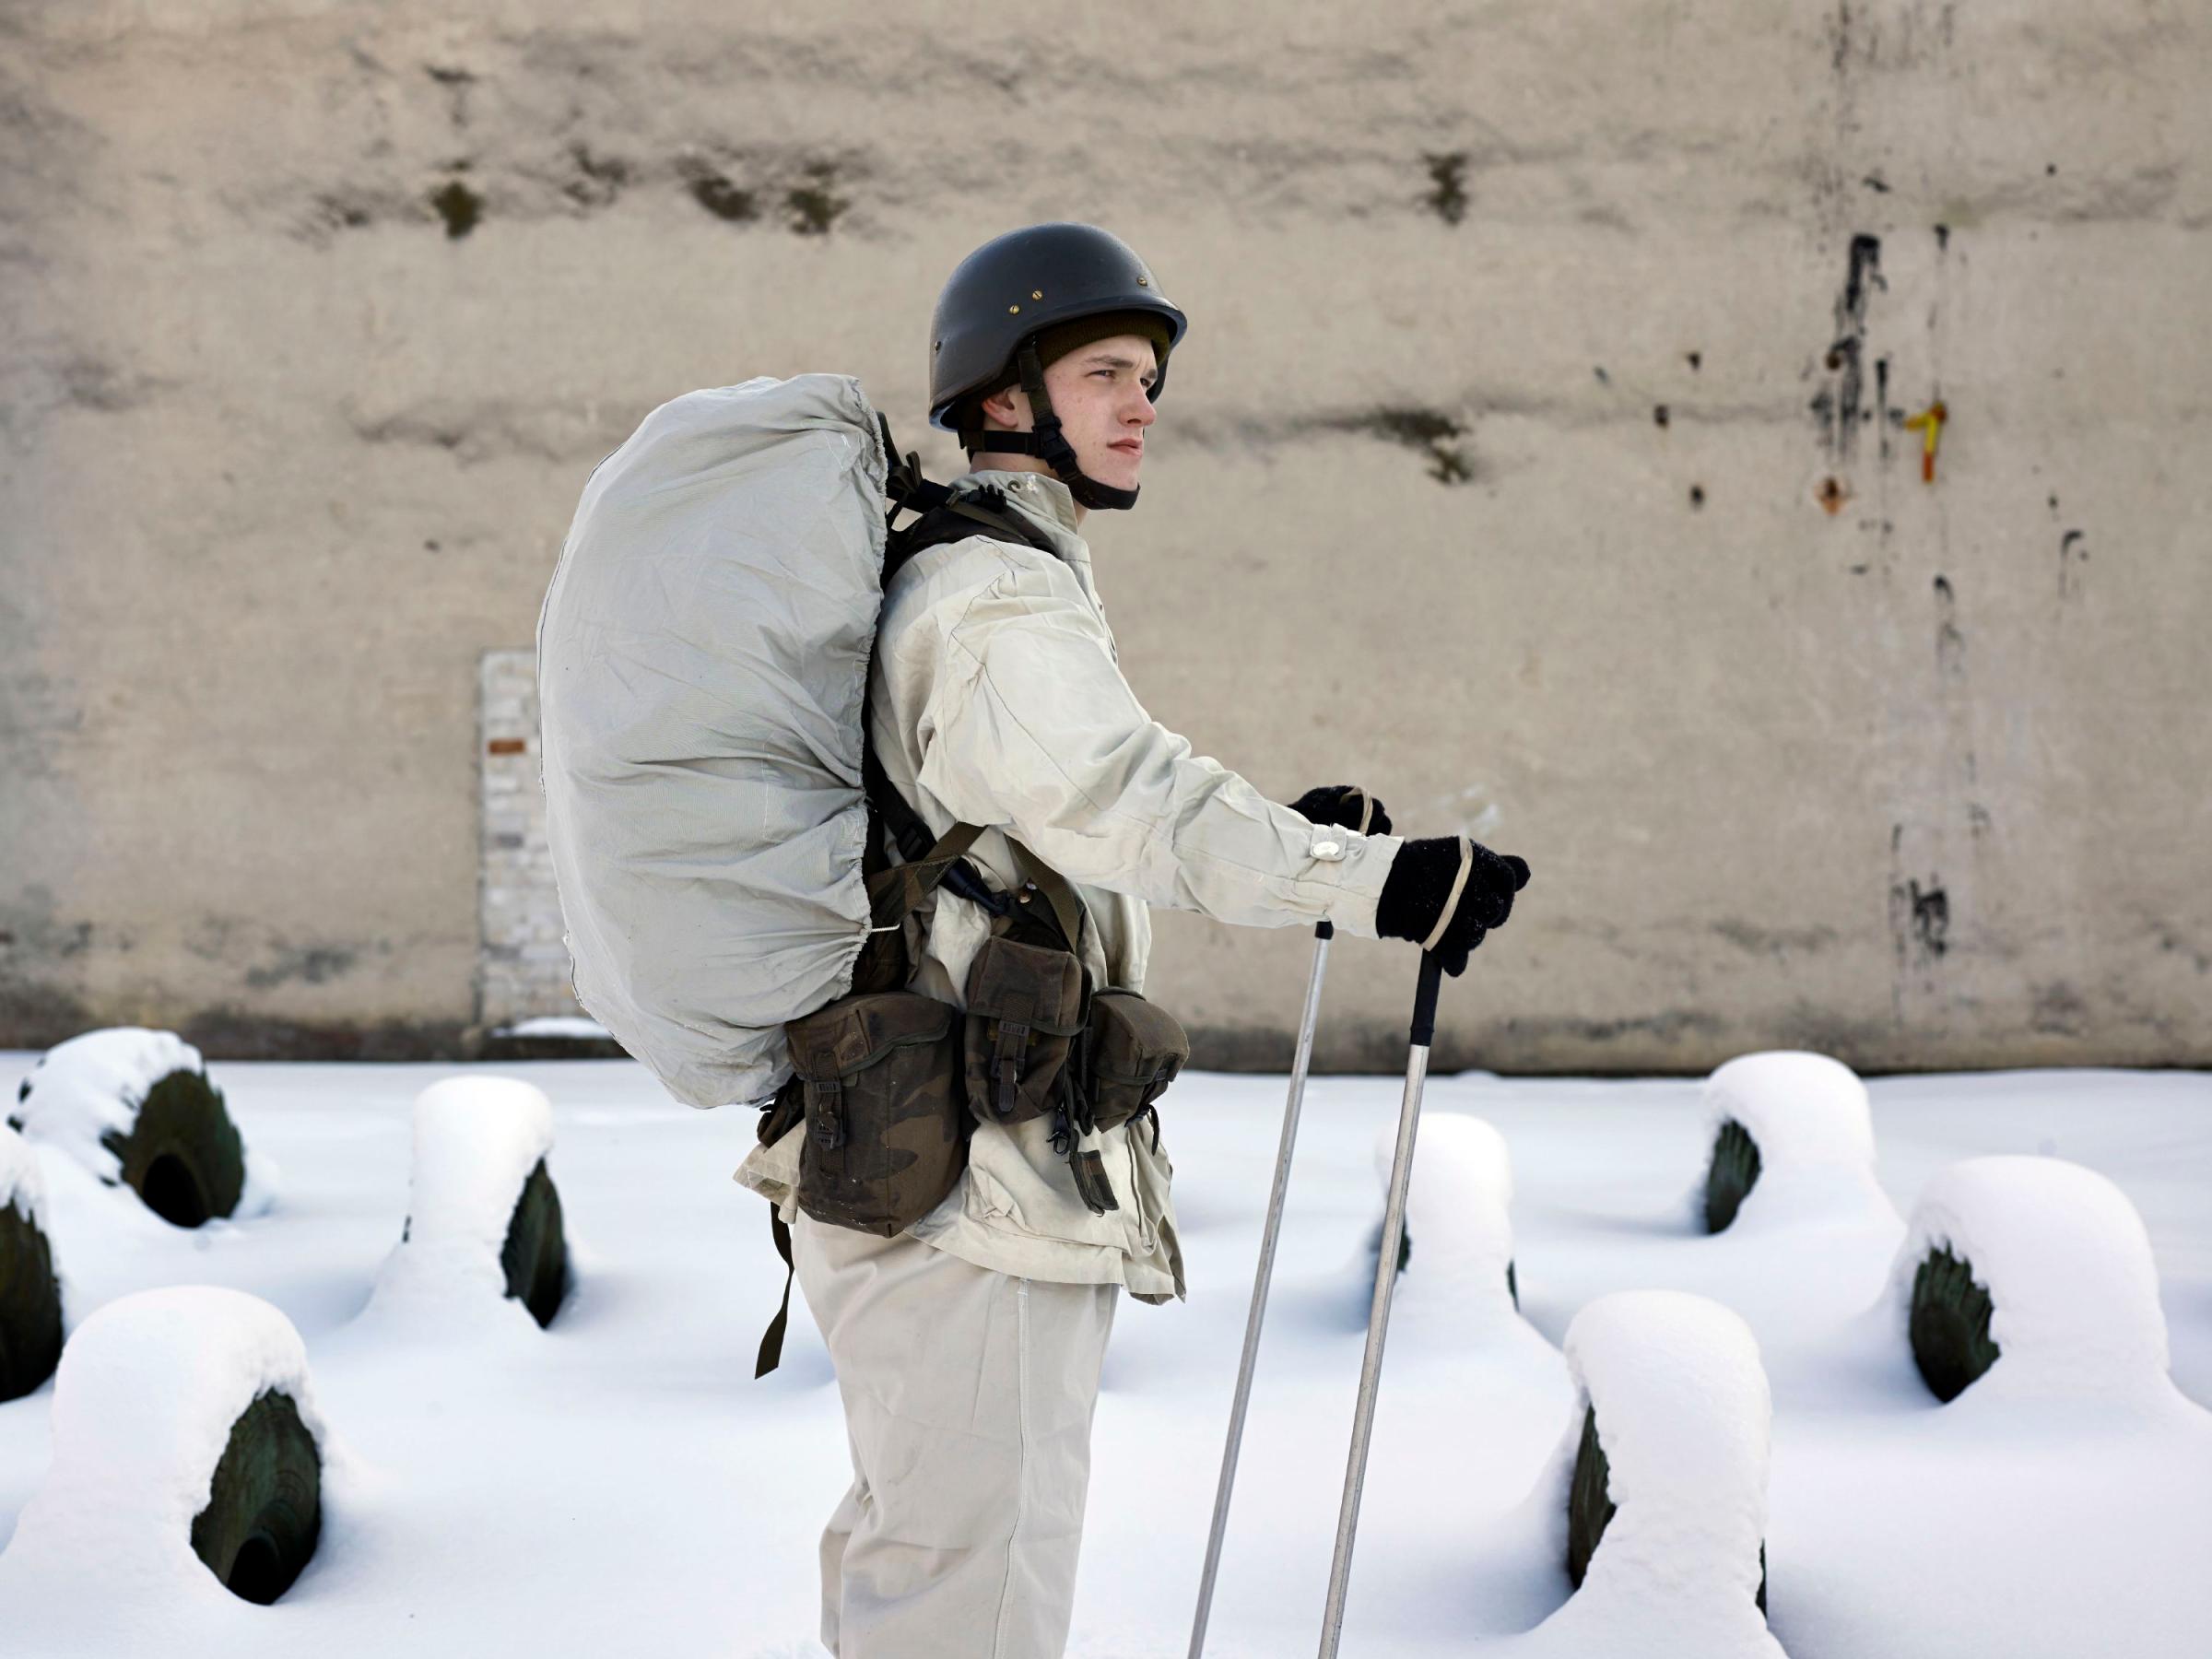 A cadet during training at The General Jonas Zemaitis Military Academy of Lithuania, Vilnius, Lithuania, Feb. 9, 2012.